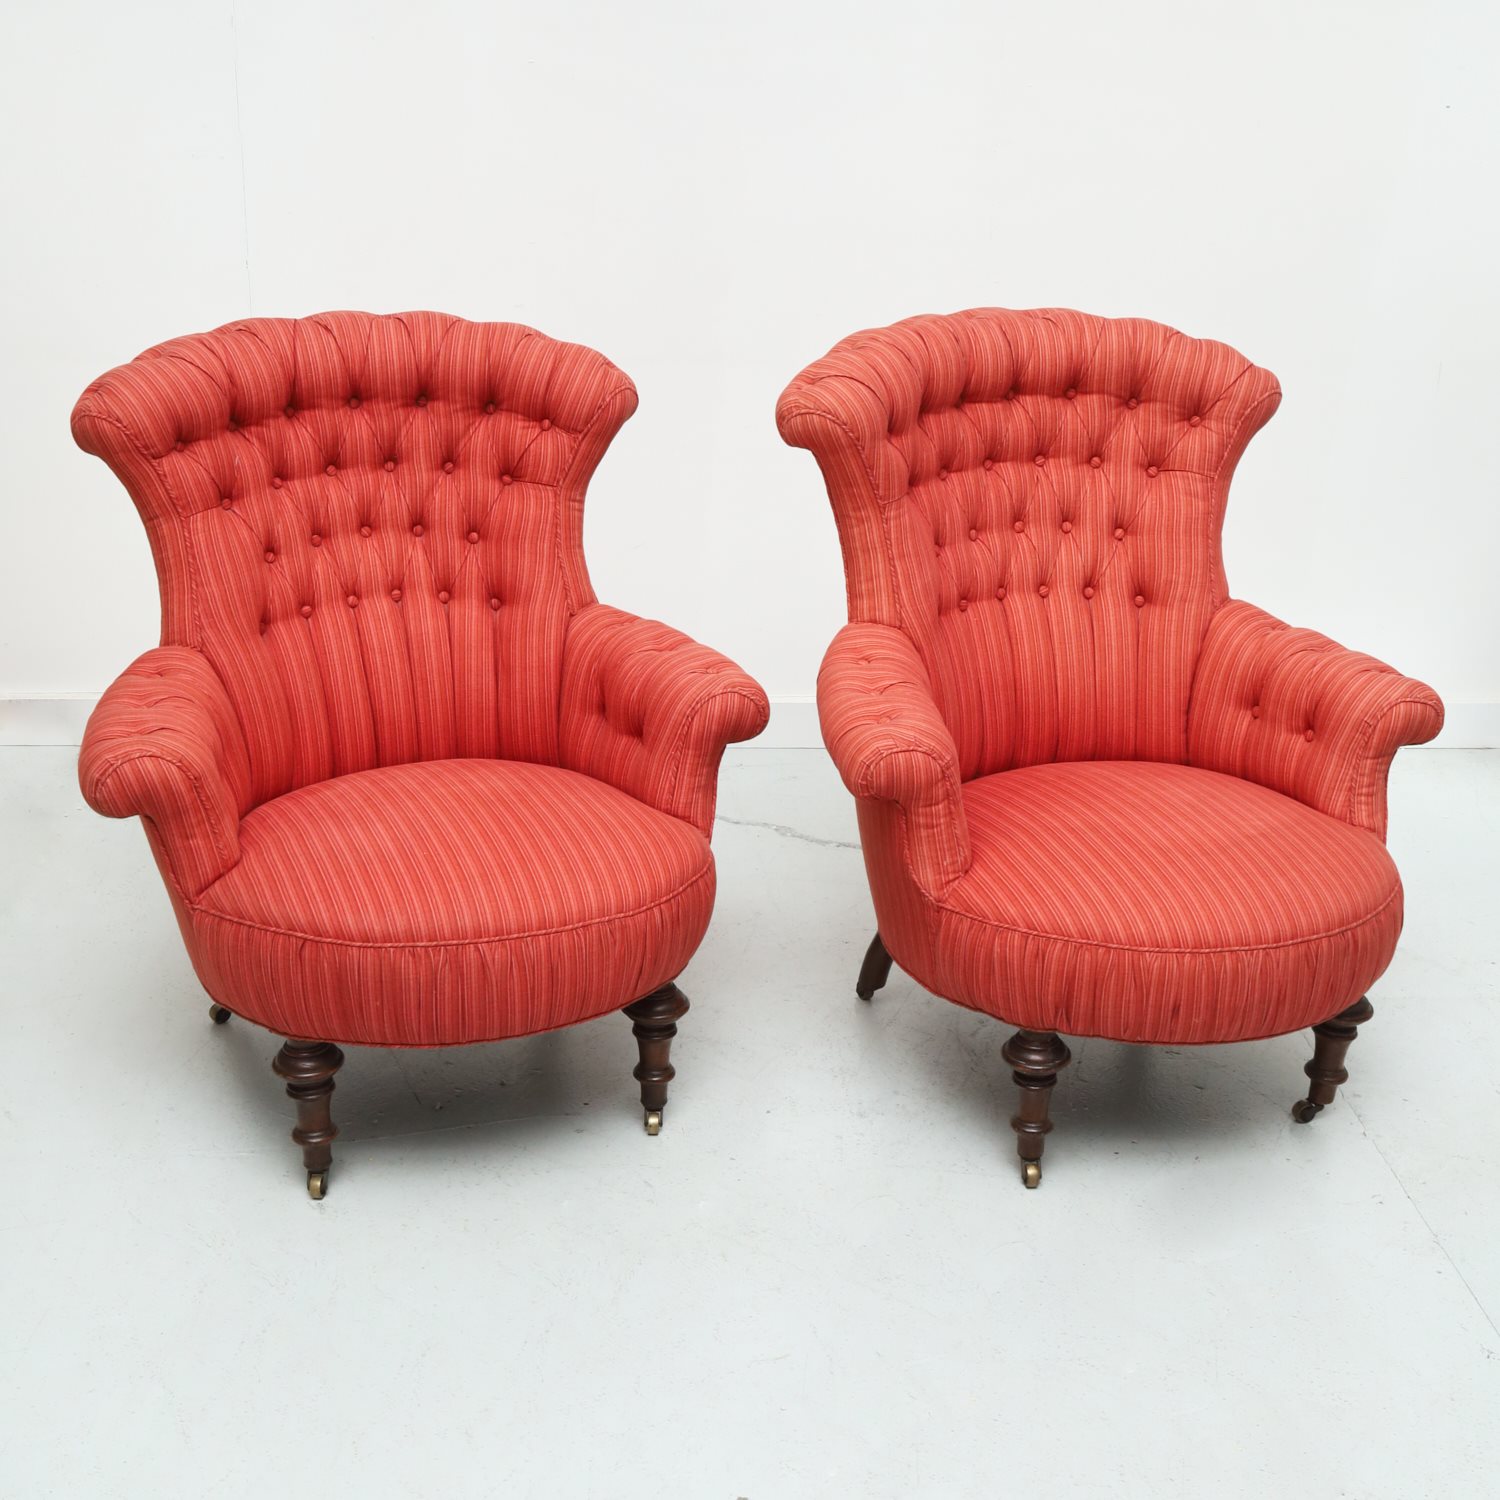 PAIR VICTORIAN CUSTOM UPHOLSTERED 361f0a